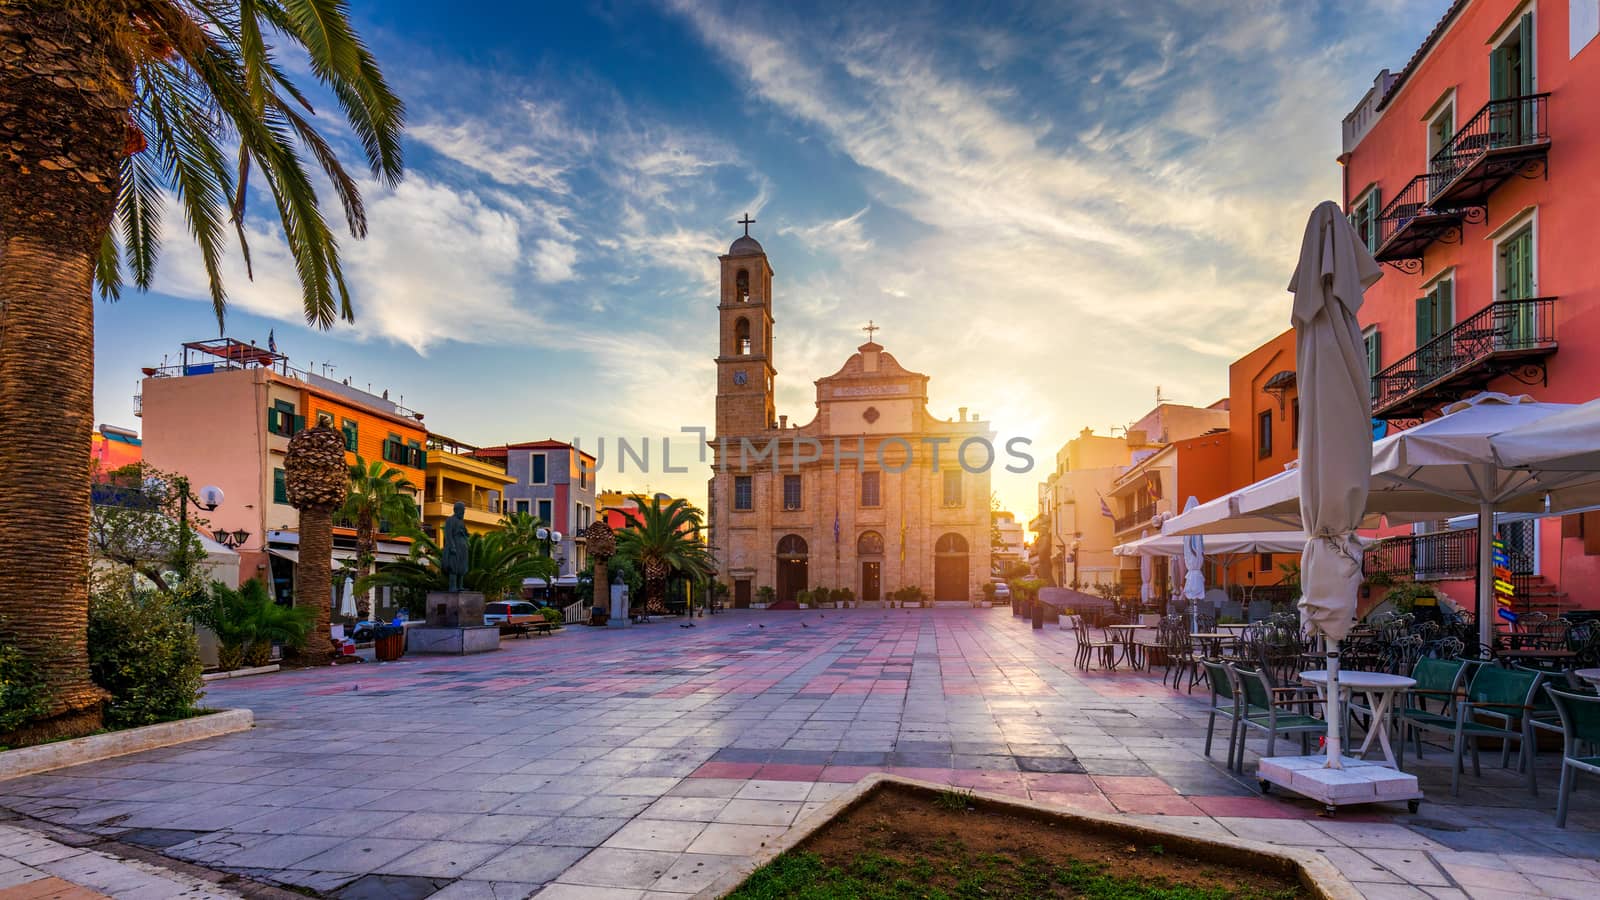 Square at Orthodox Cathedral in the old town of Chania on Crete, by DaLiu